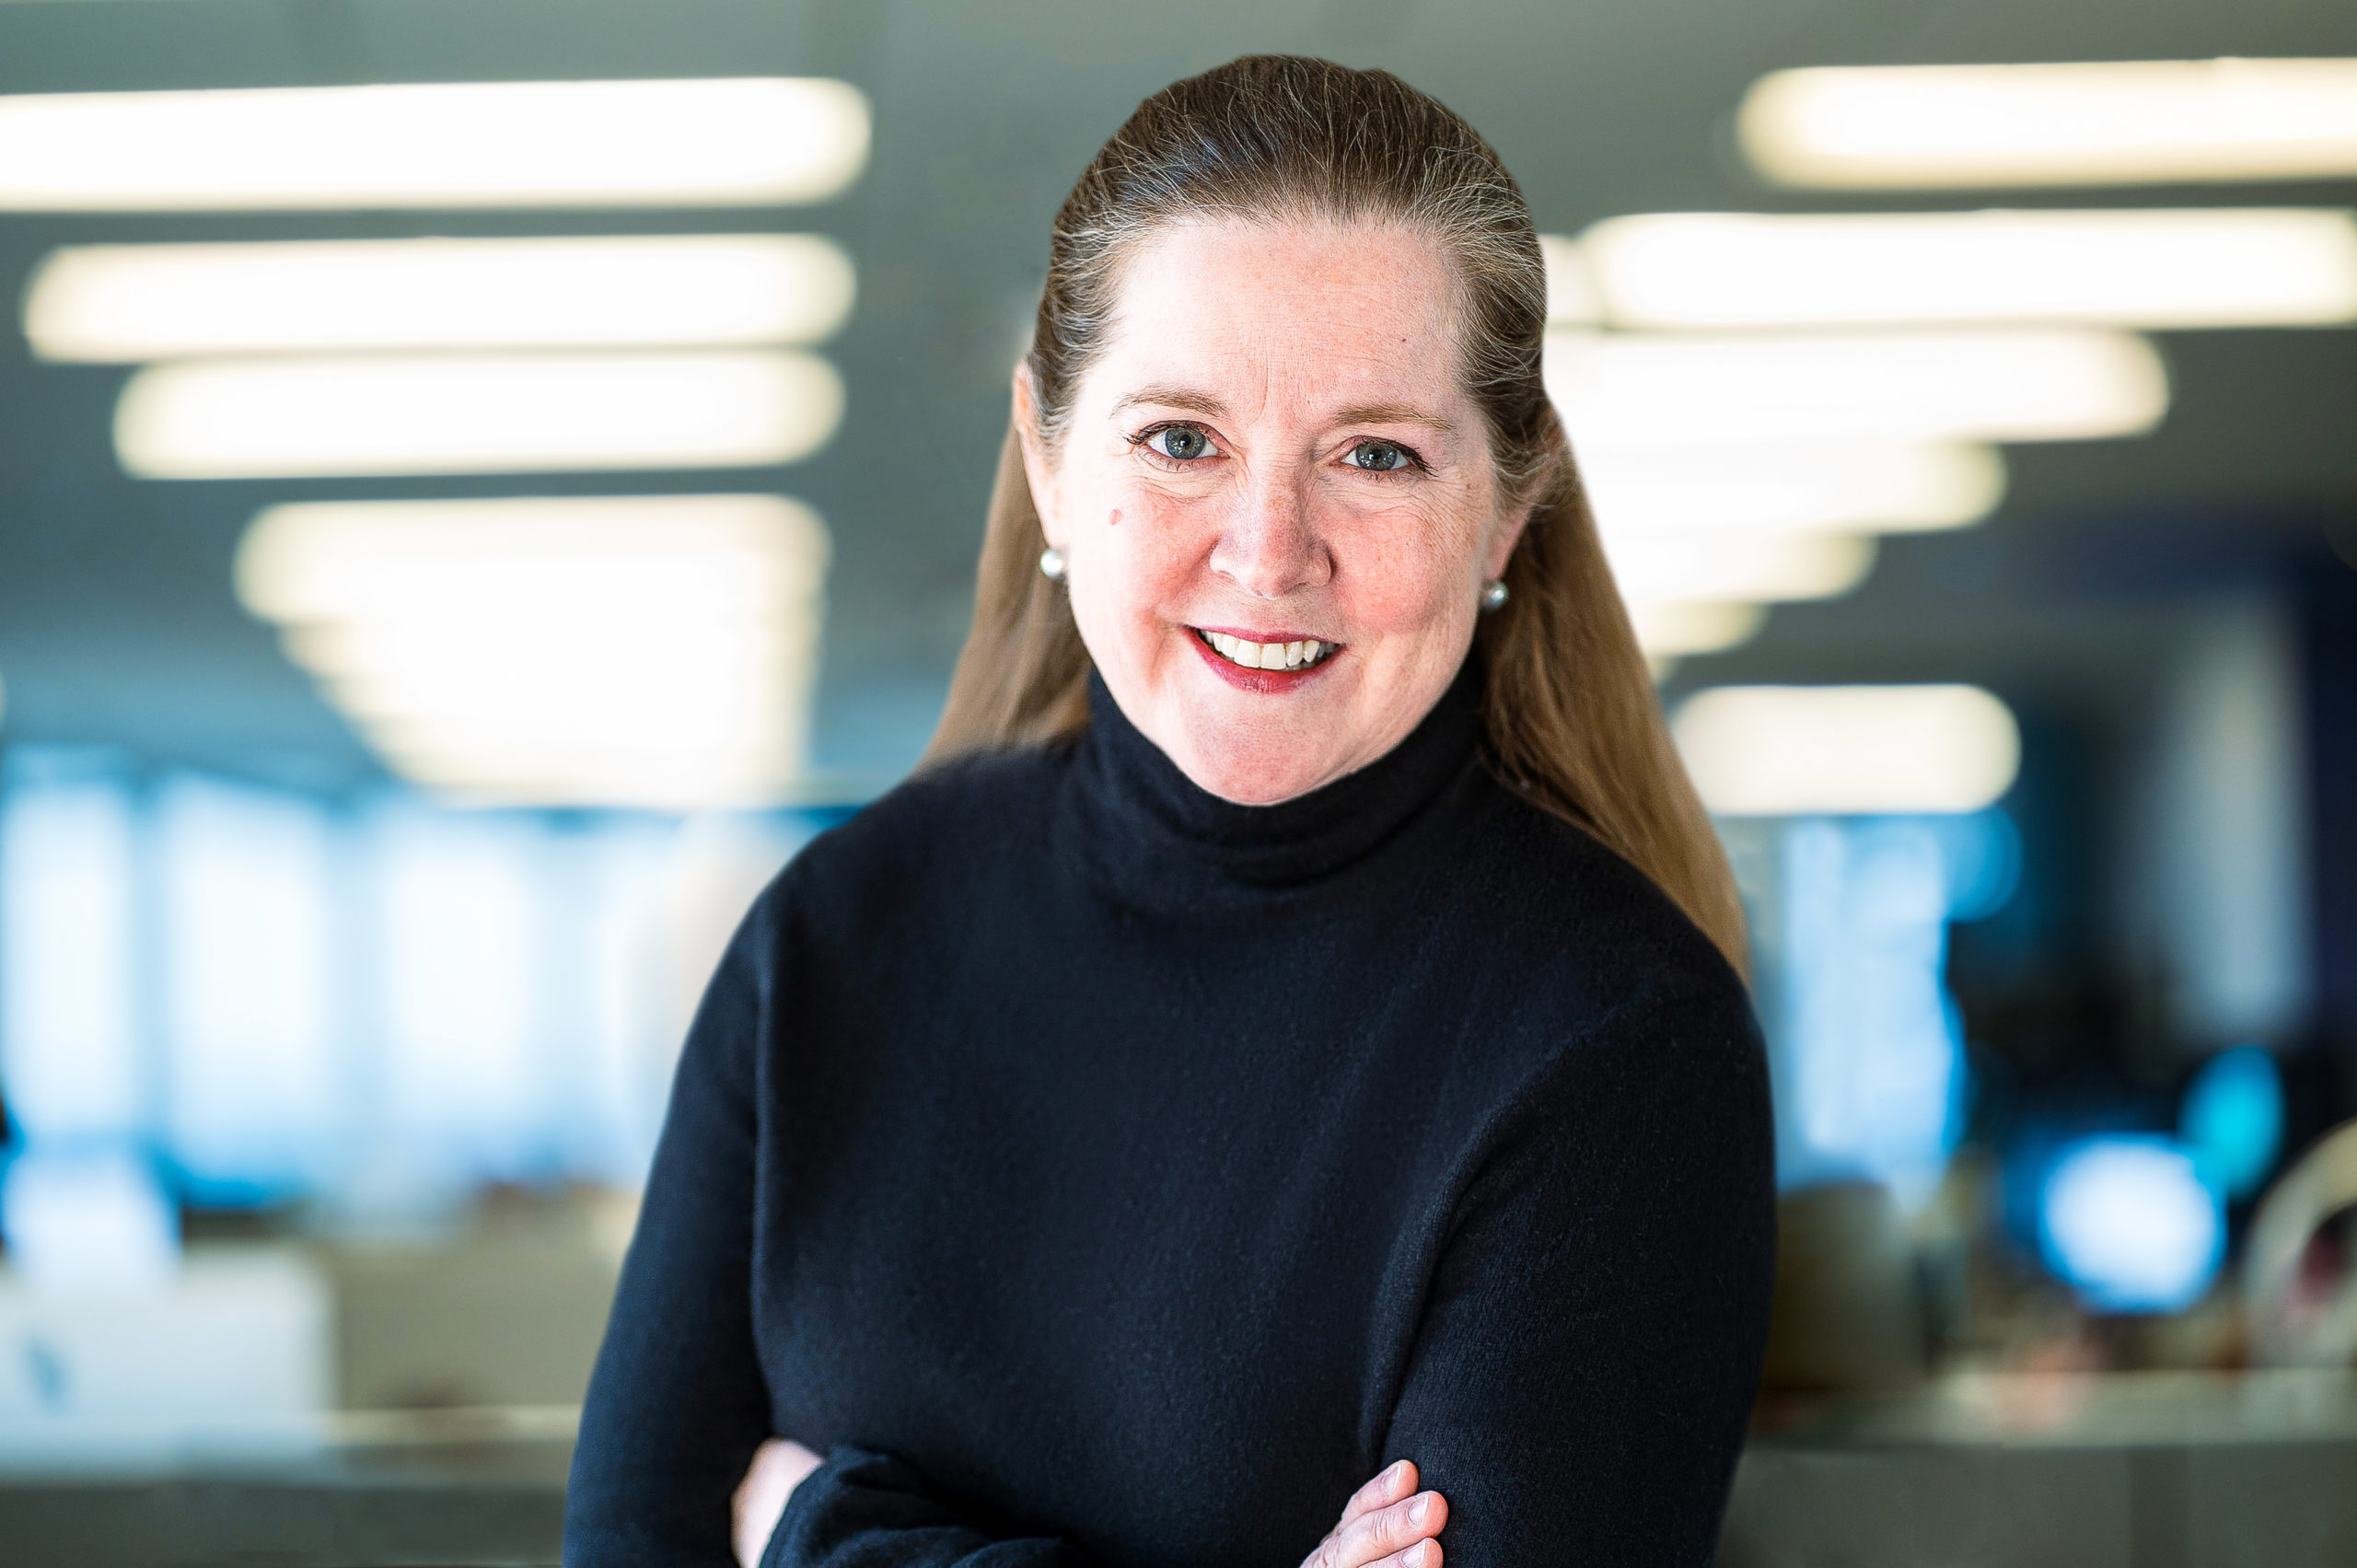 photo of Kate O'Brian Scripps News President in a black turtleneck wearing peal earrings with her arms crossed